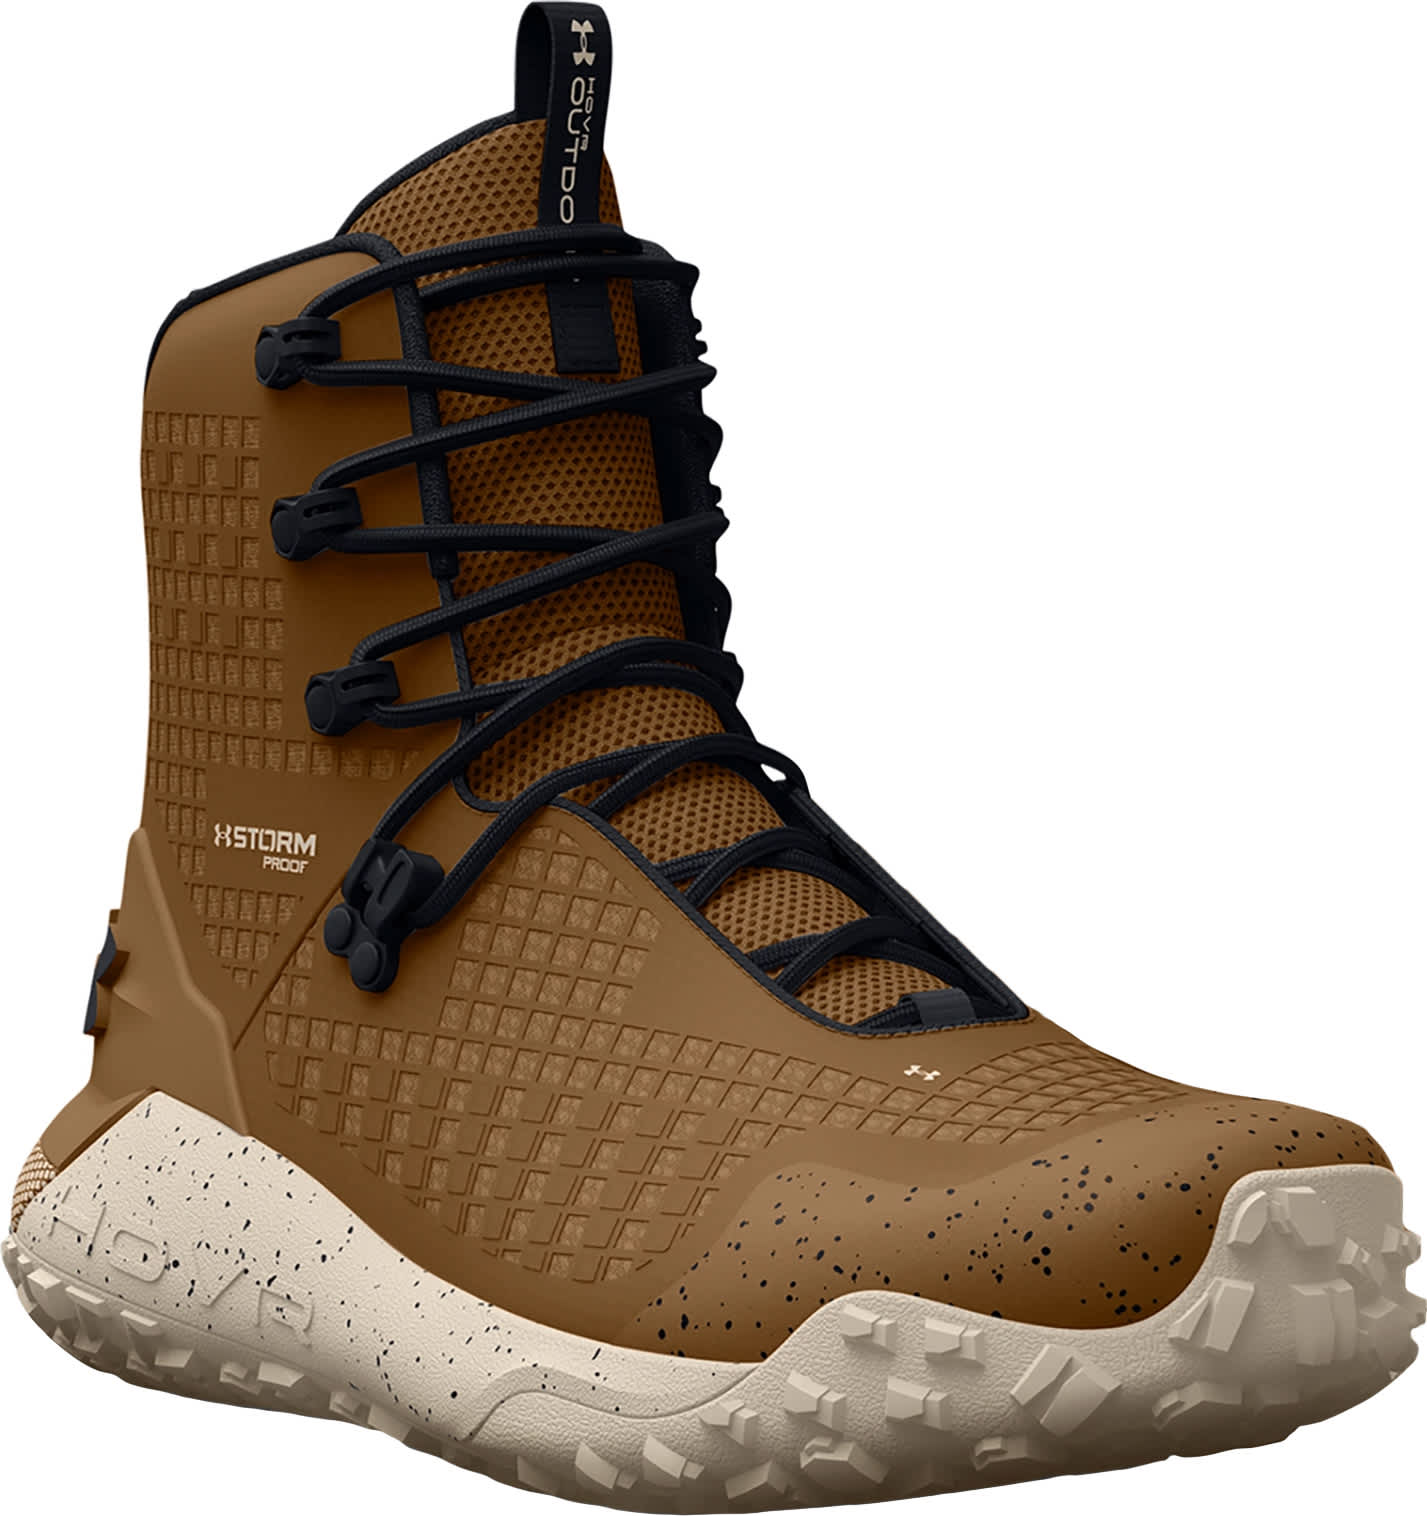 Under Armour® Unisex HOVR Dawn 2.0 Waterproof Hunting Boots